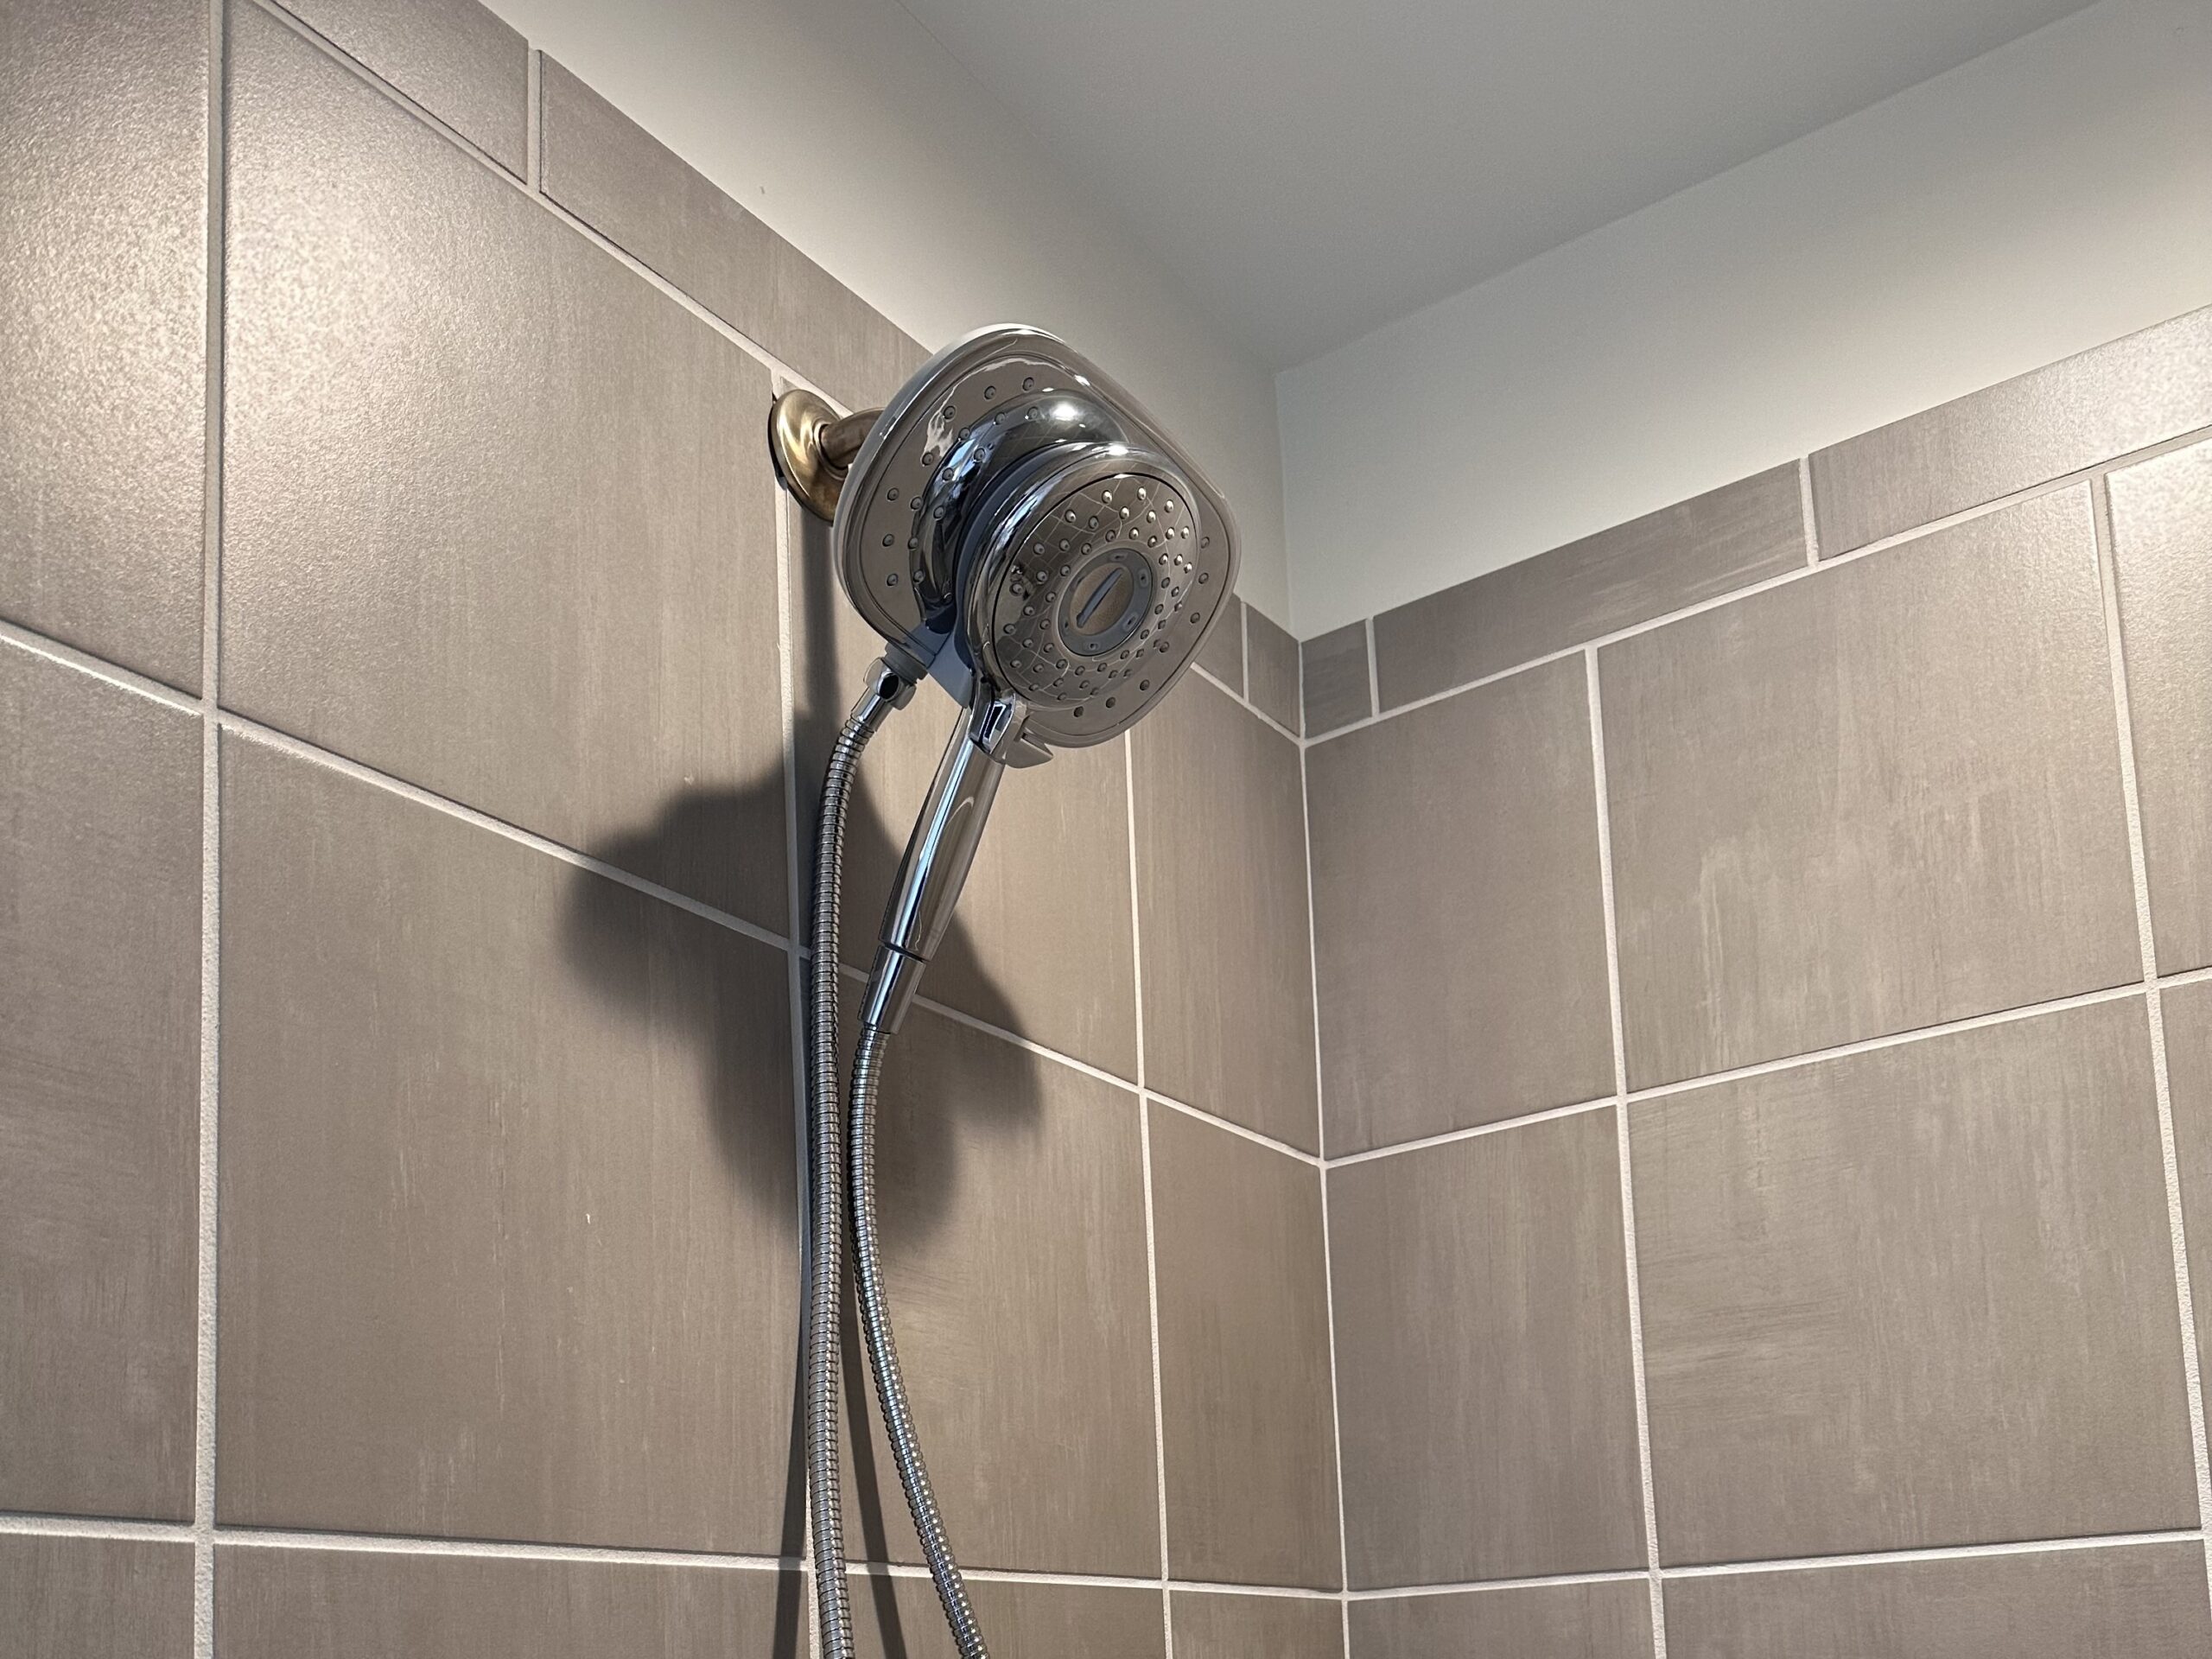 Chrome American Standard Spectra Plus Duo Shower Head mounted on taupe tile wall